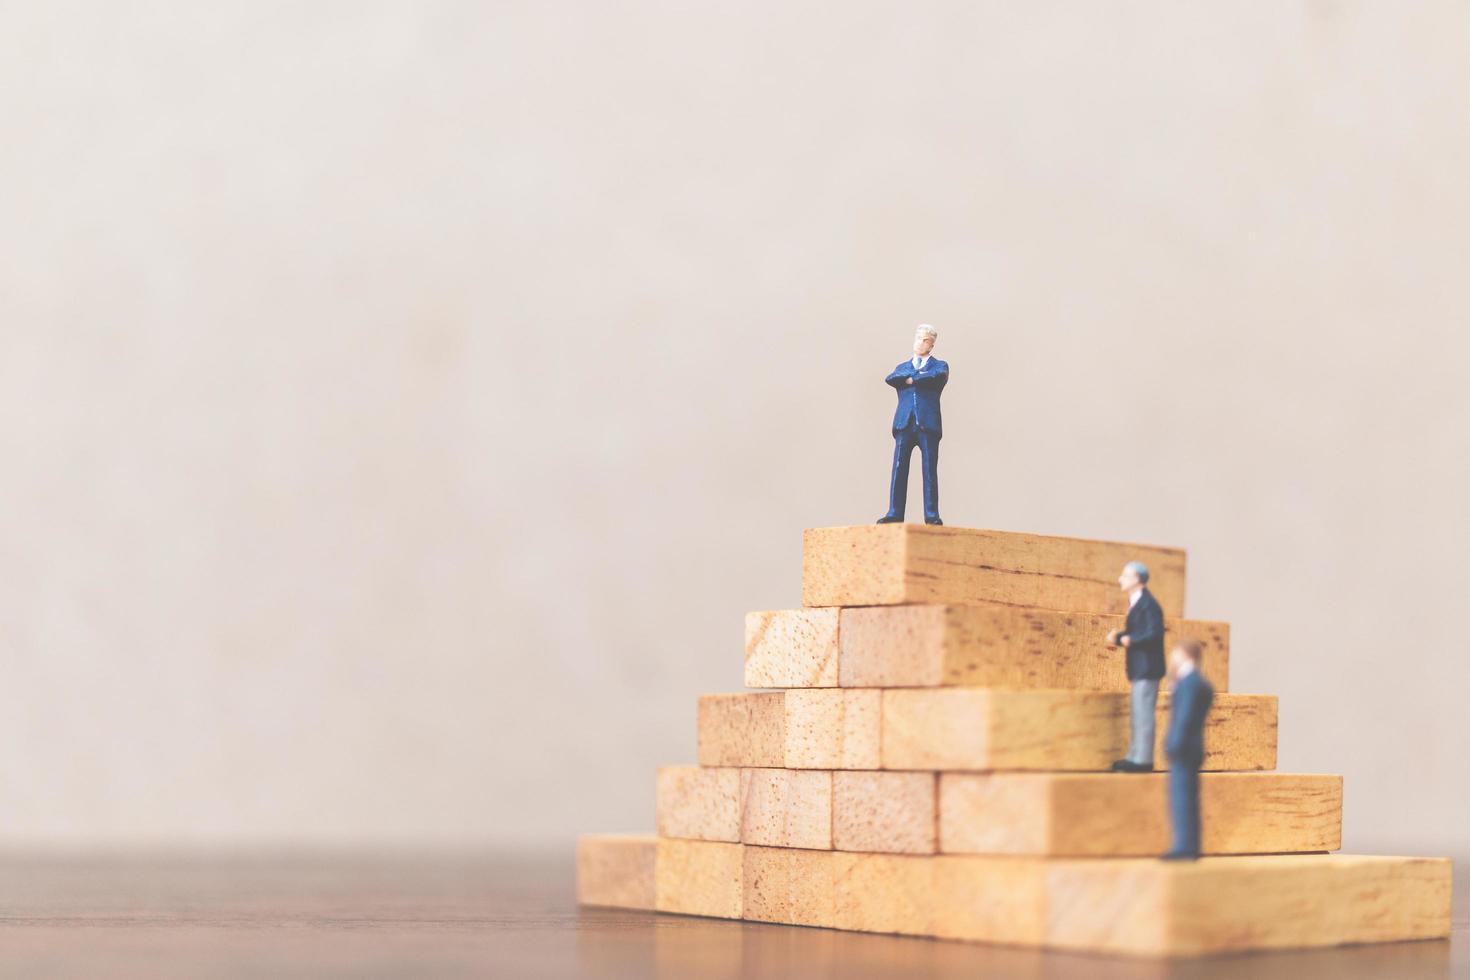 Miniature businessmen standing on a wooden block, successful business leader and teamwork concept photo